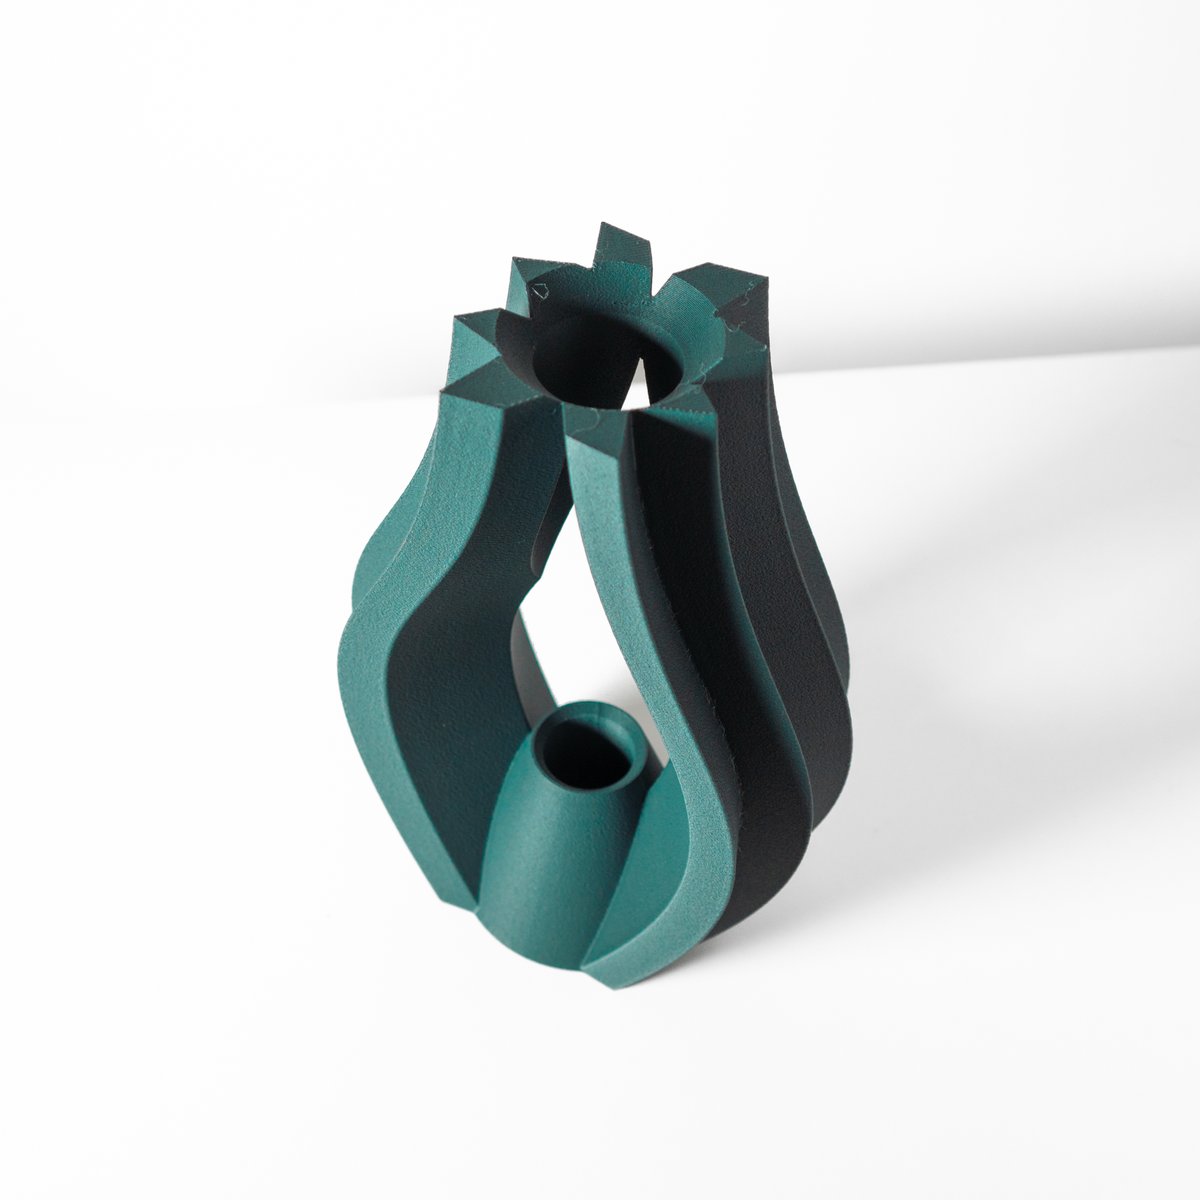 The Krono Vase, 3D Printed by Terra de Verdant.              

Free STL download and commercial license available at
@Thangs3D: than.gs/m/1062411

Explore our profile on Thangs for a wide range of home decor items including planters, vases, pen holders, and more!